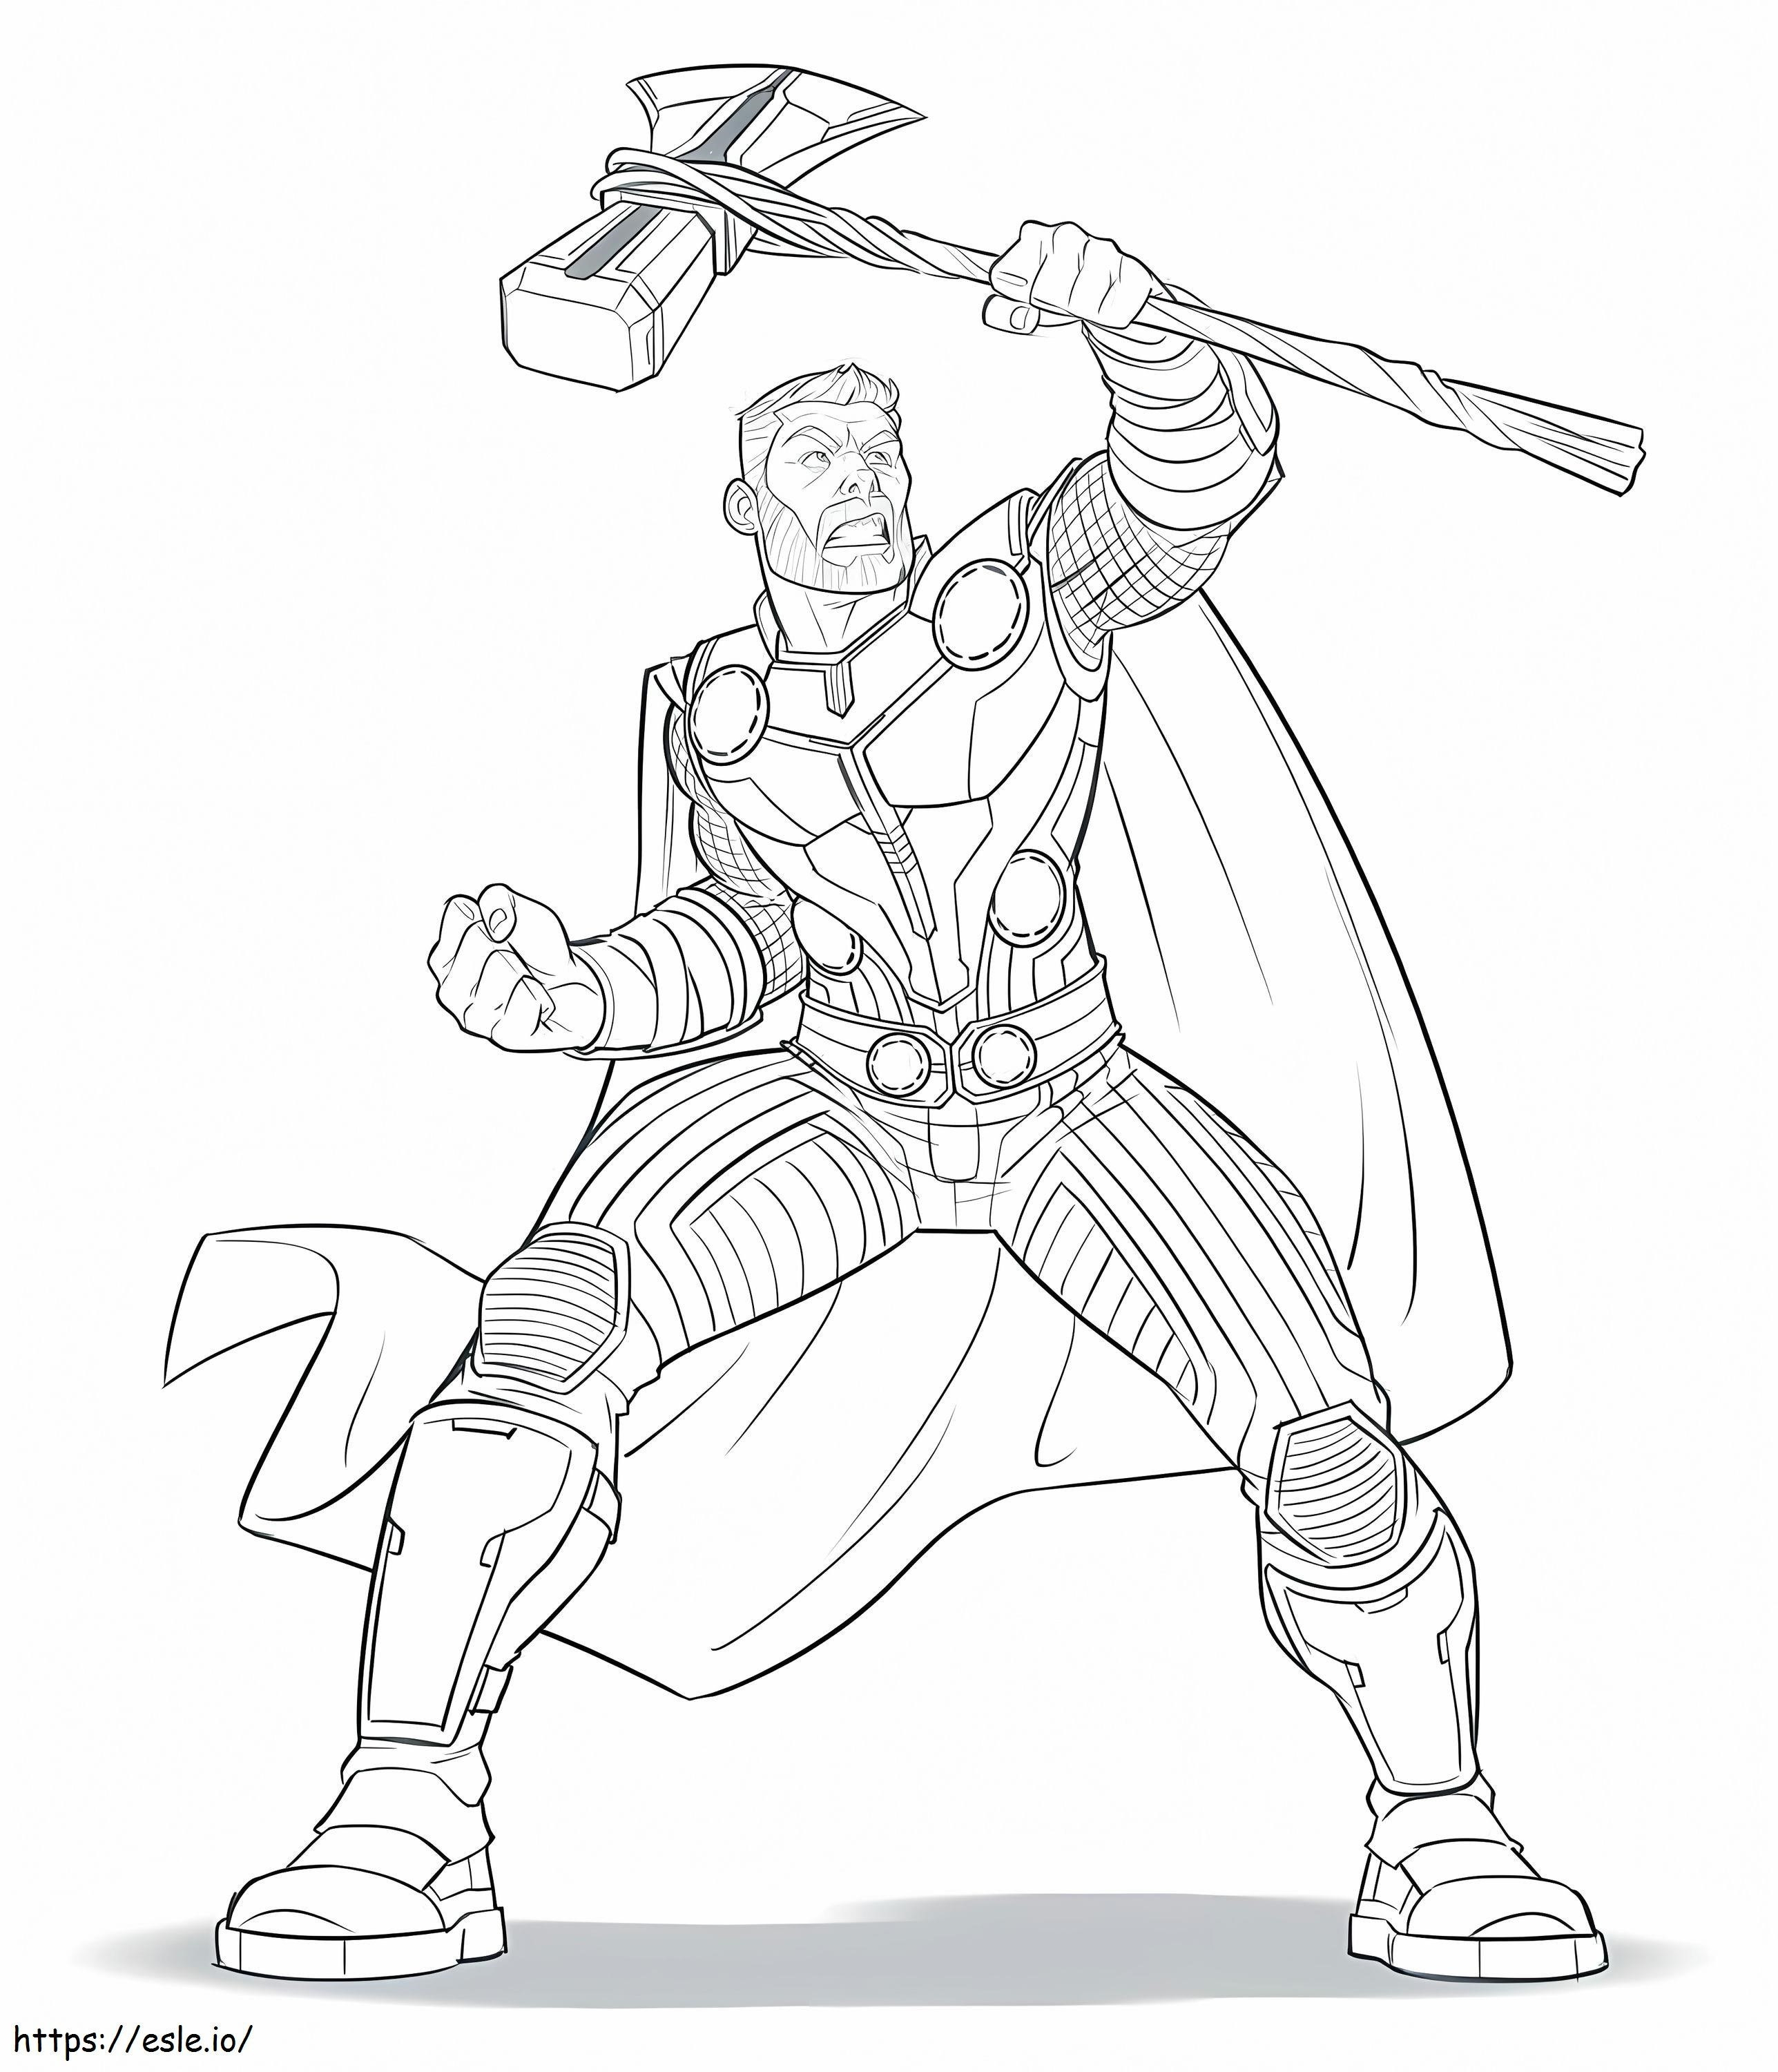 Thor Holding Ax coloring page